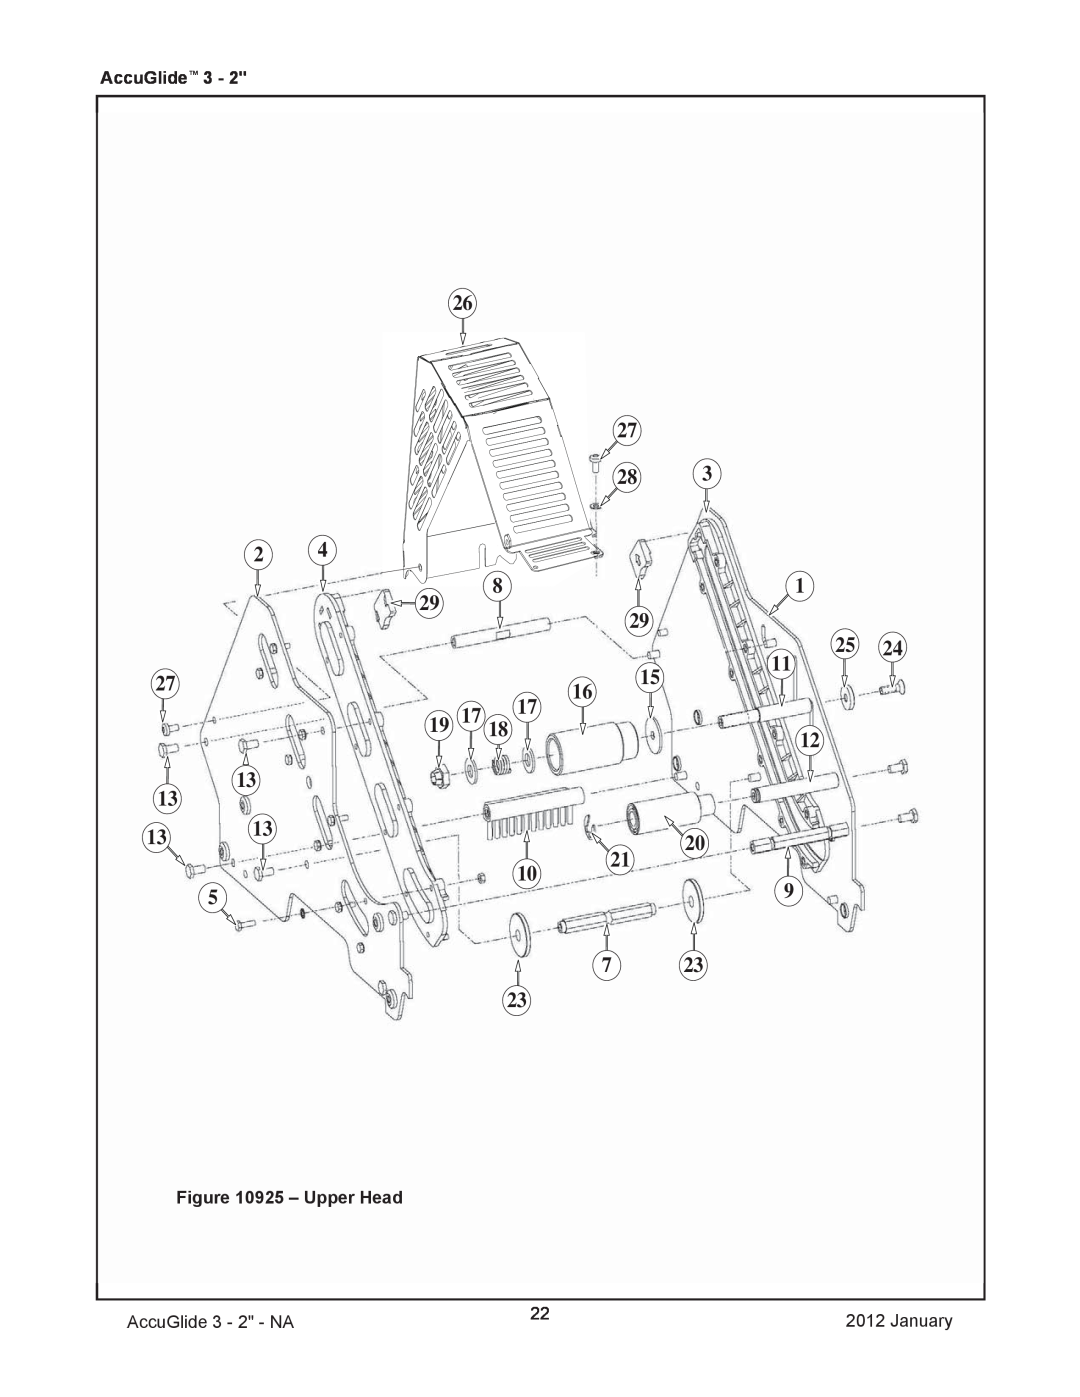 3M 40800 operating instructions Upper Head, AccuGlide 3 - 2 - NA, January 